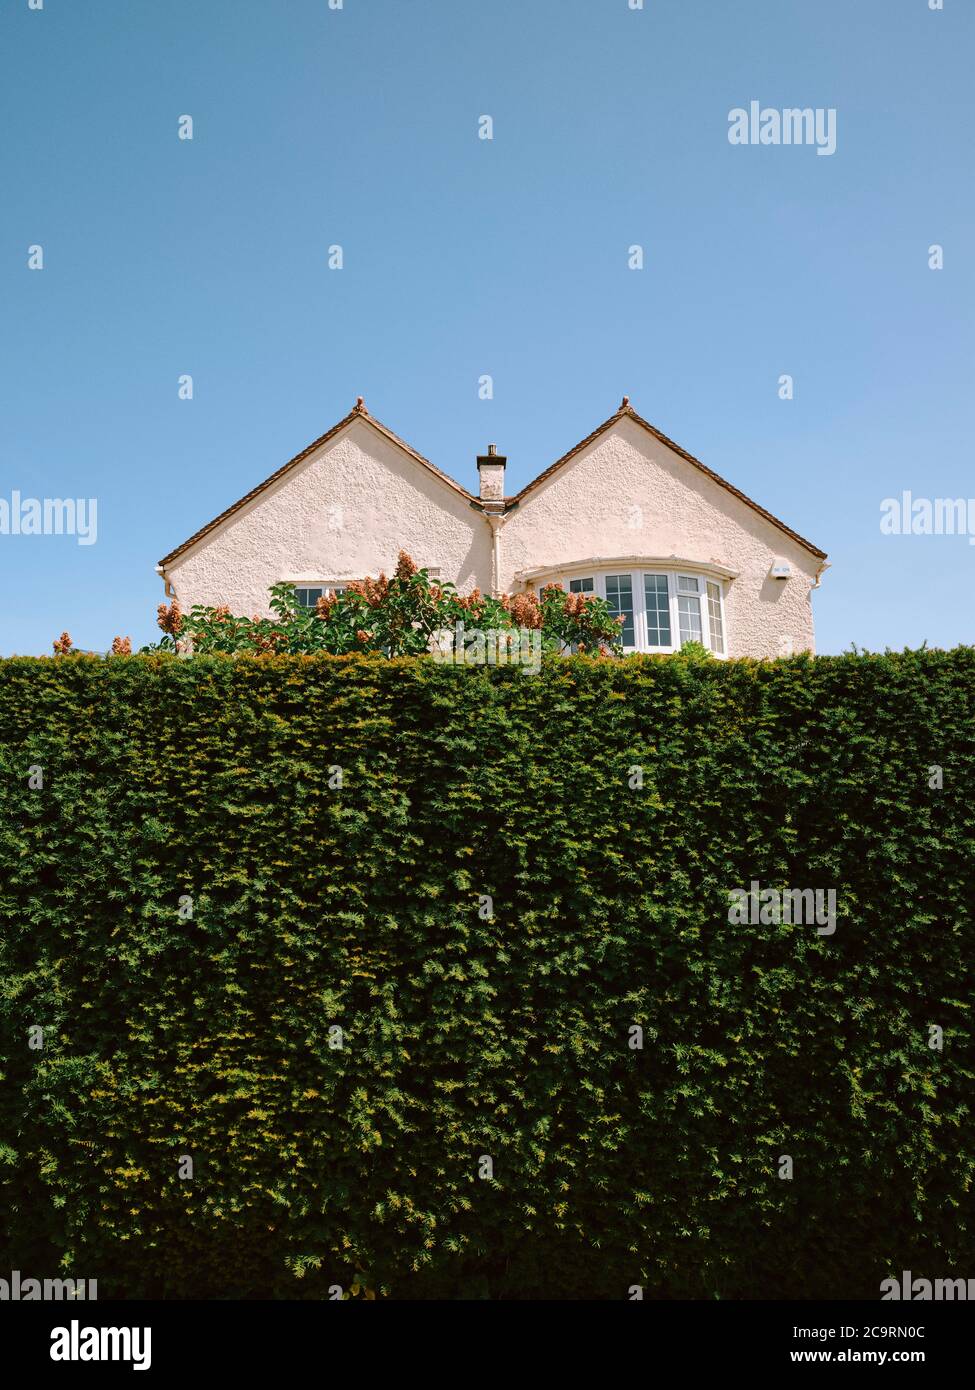 A typical M Shaped / Double Pitched / Double Gabled Roof suburban house property architecture half hidden behind a high green garden hedge & blue sky. Stock Photo